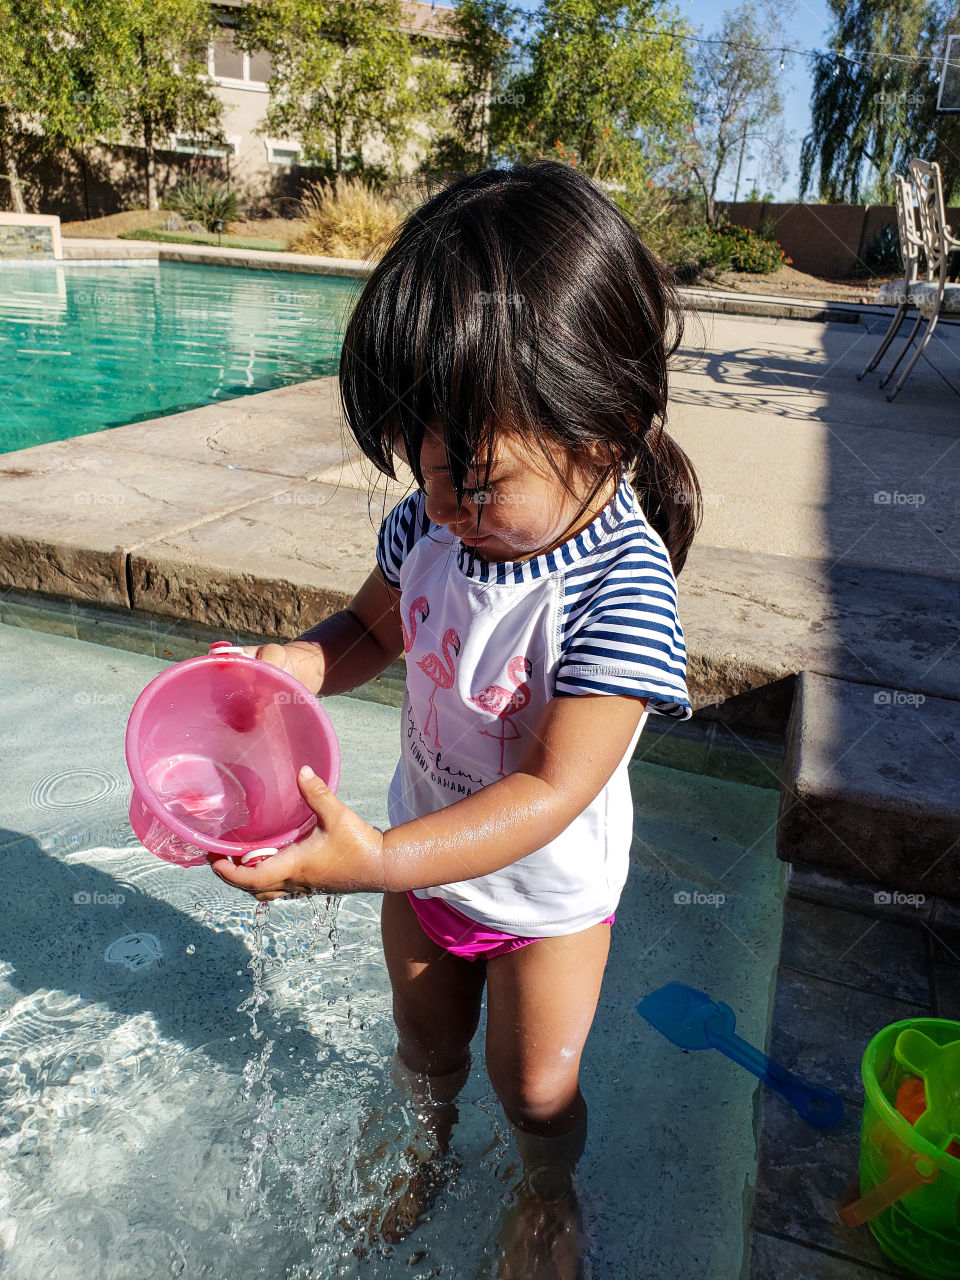 Toddler wearing swimsuit playing with bucket in the pool